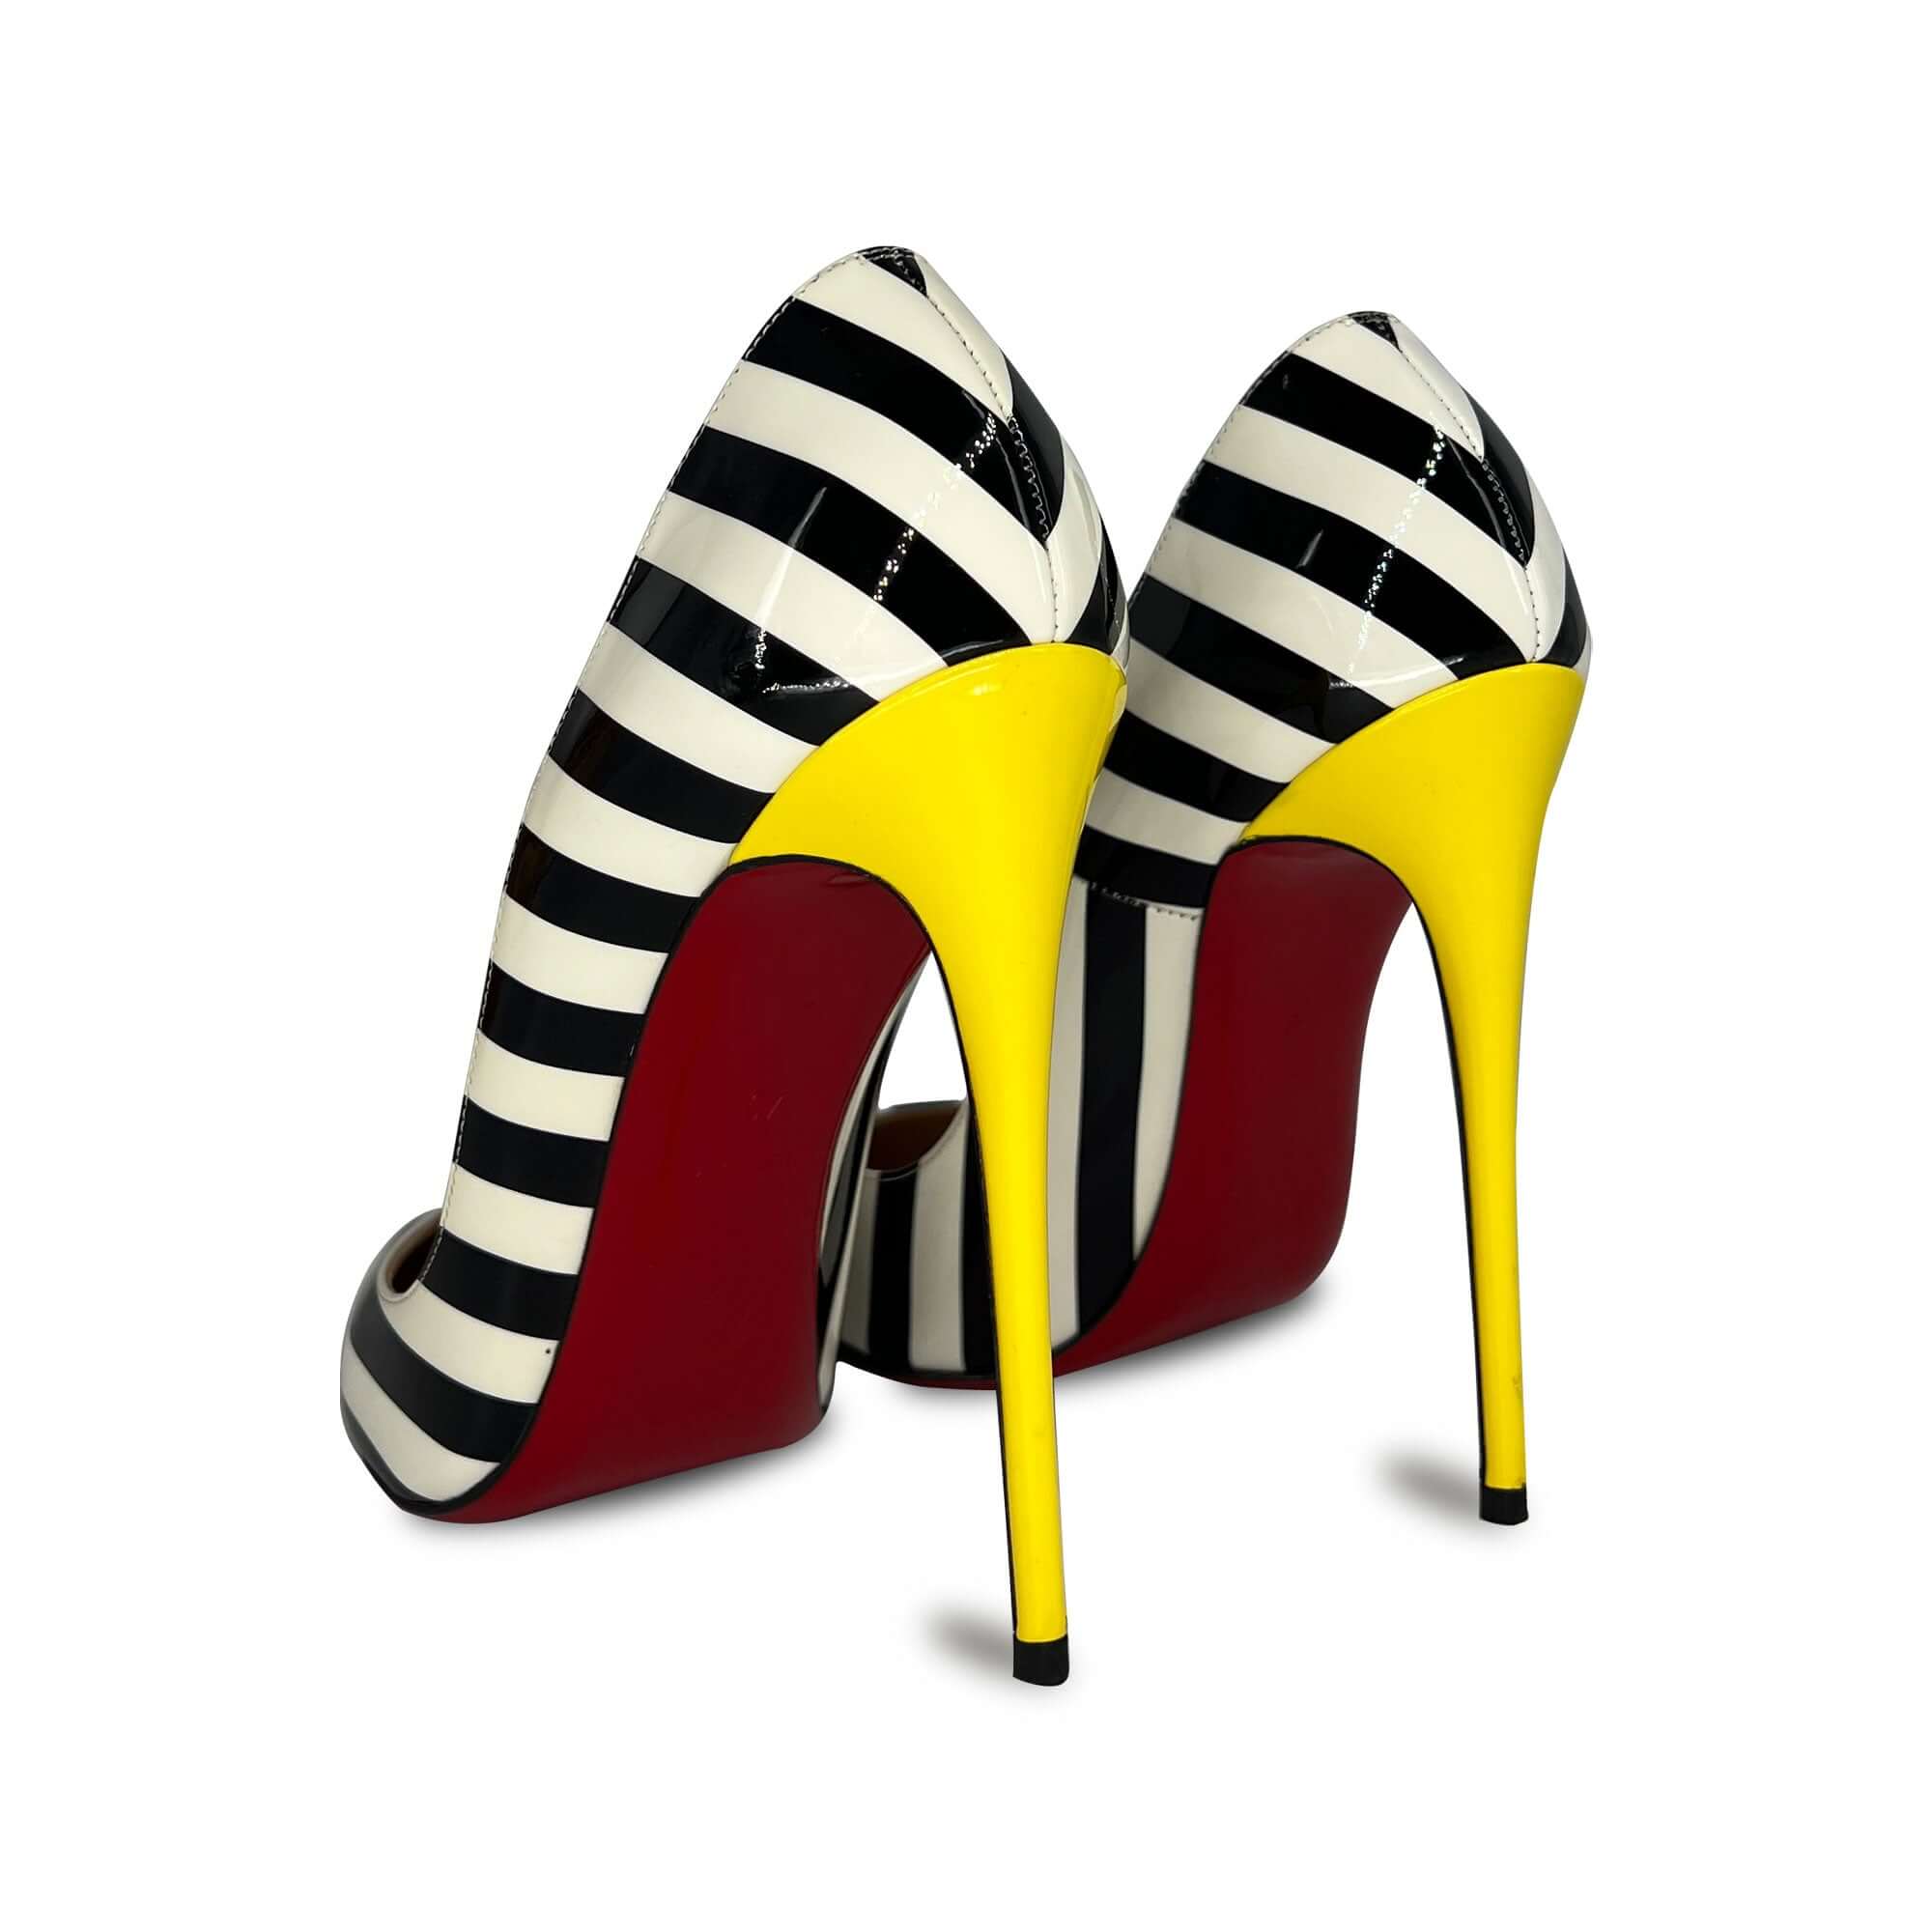 Christian Louboutin So Kate stripped patent leather pumps